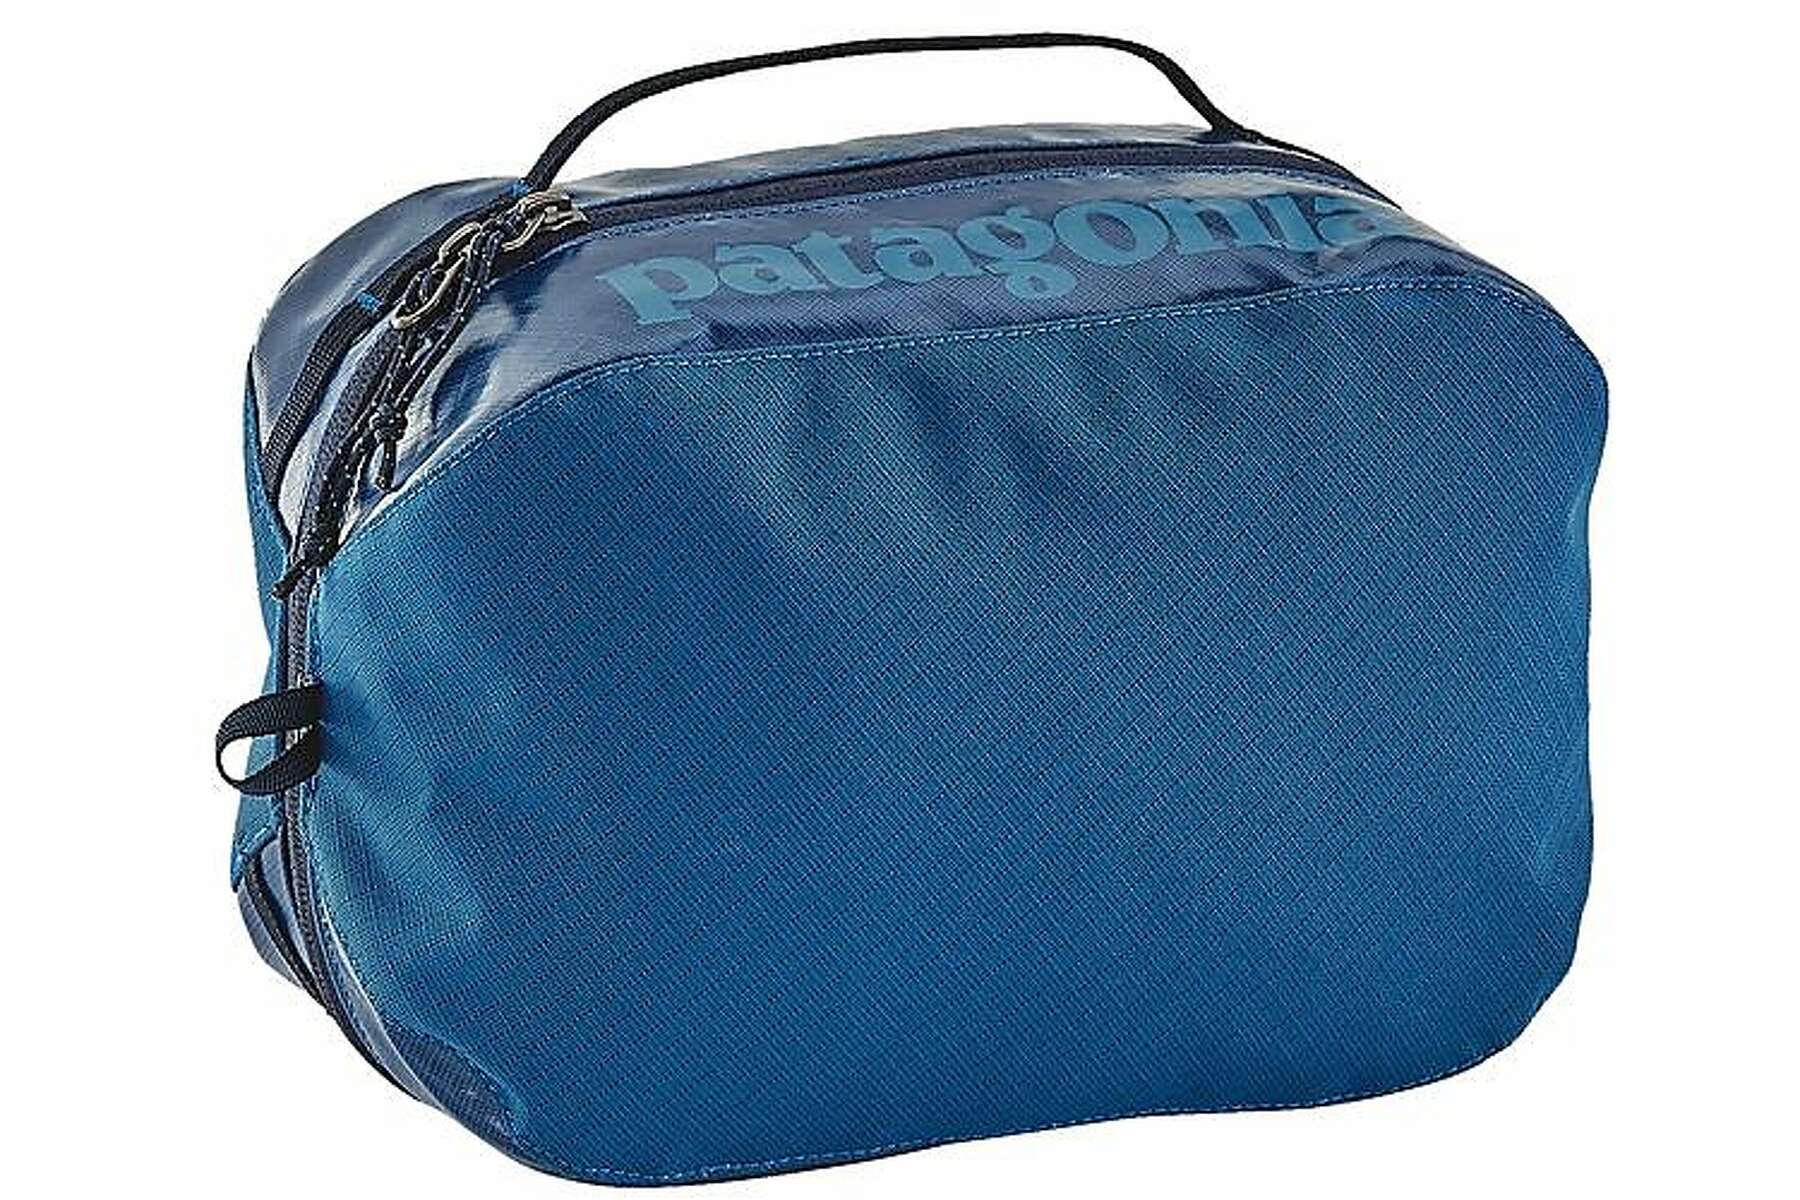 Mindre end bjerg Bekræfte Gear review: Patagonia Black Hole Packing Cubes